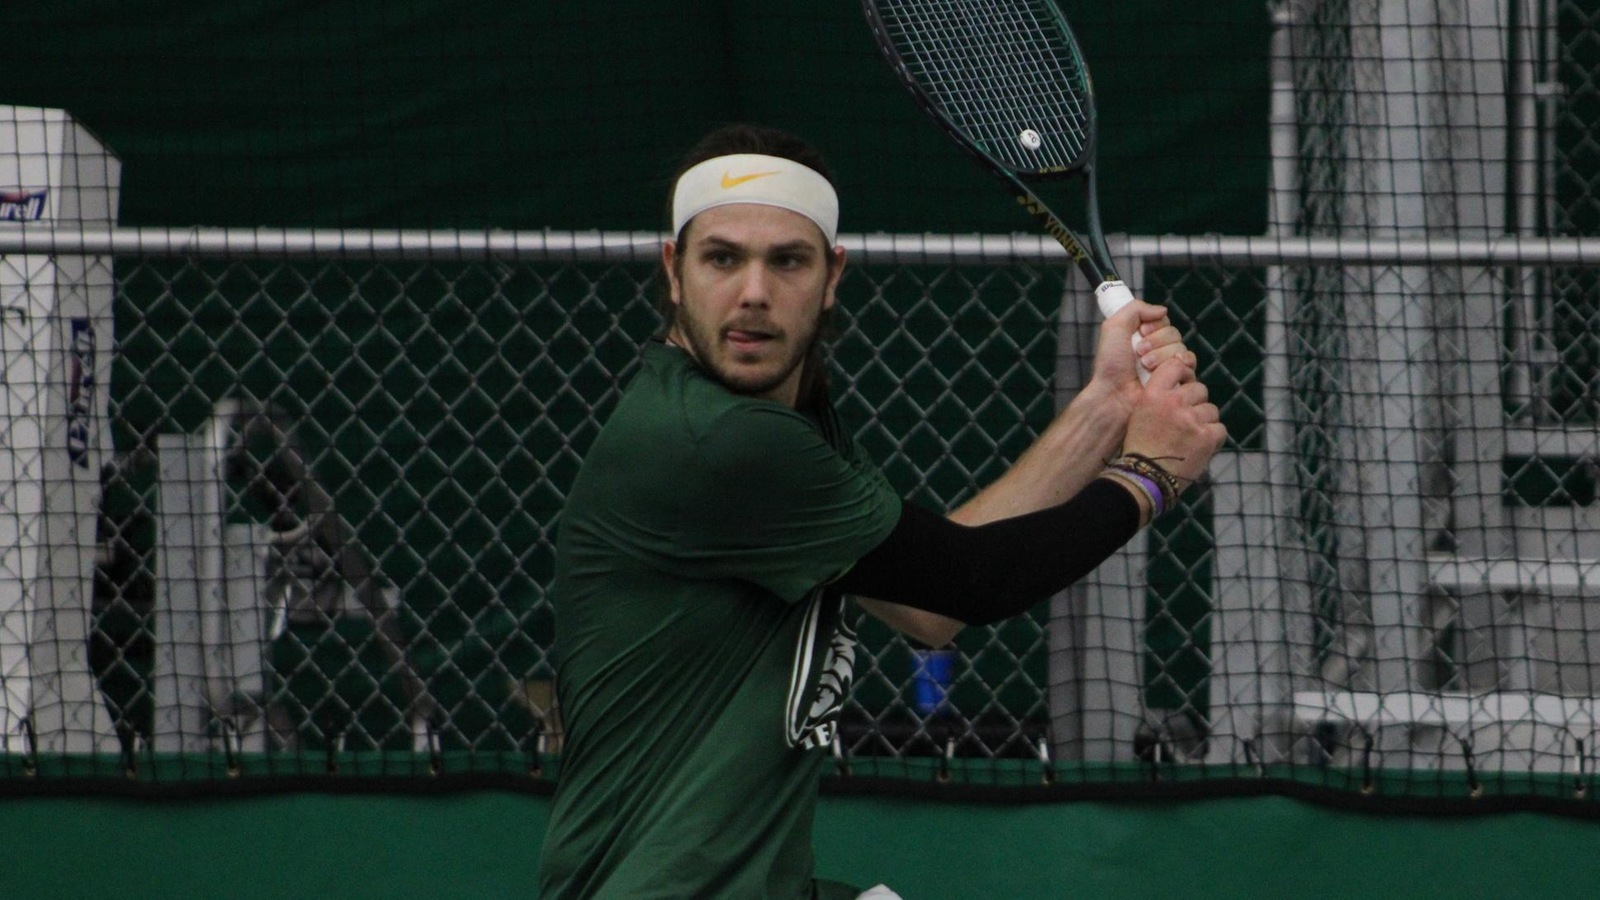 Cleveland State Men’s Tennis Competes At ITA All-American Regional